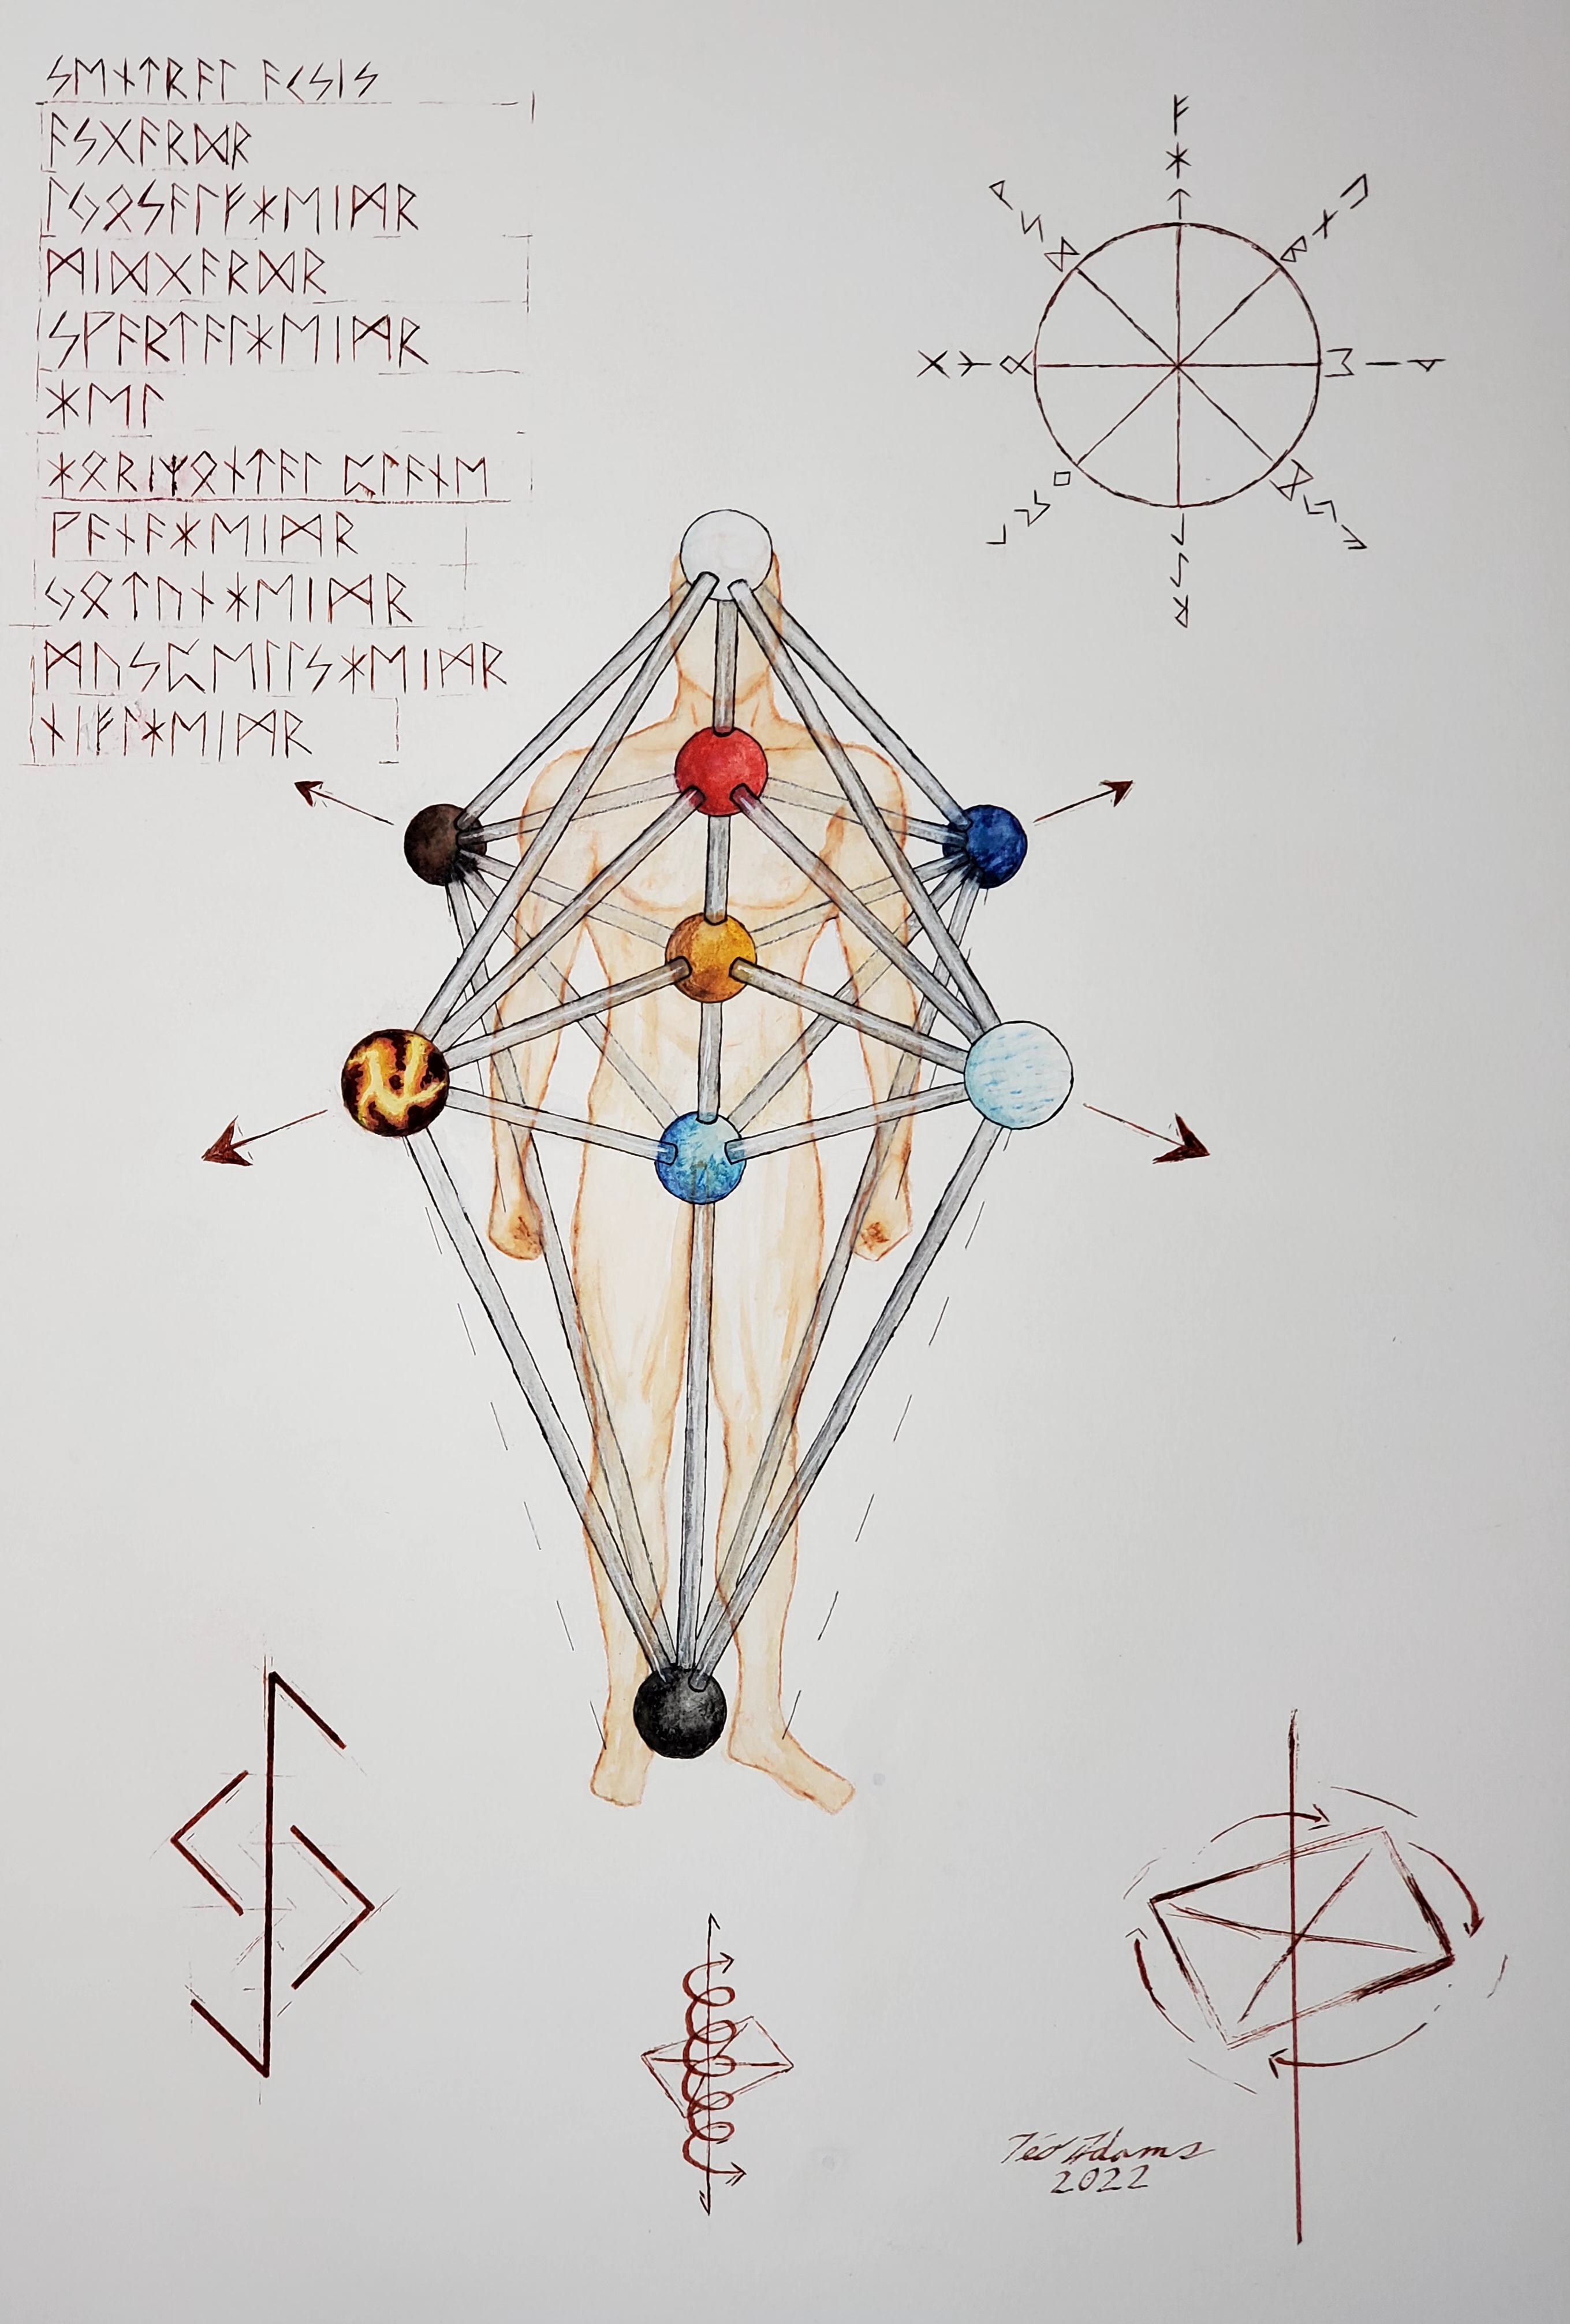 A painting of man standing amdist nine connected spheres